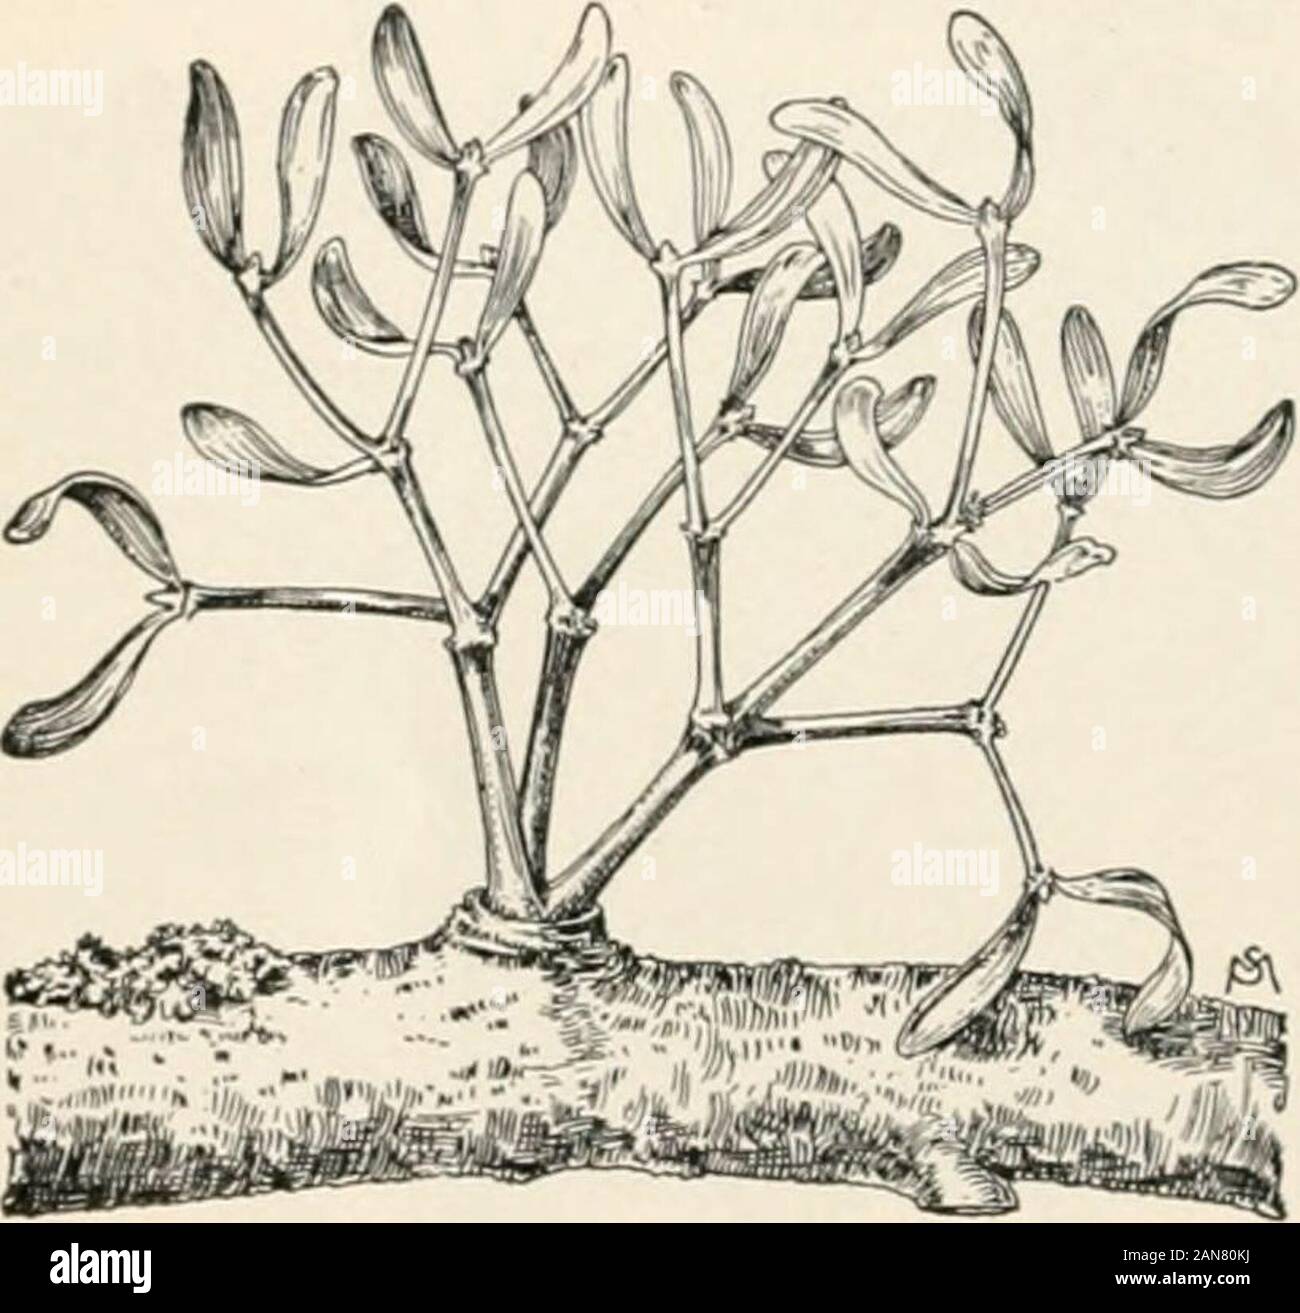 Students' handbook to accompany Plants and their uses . kinds ofplants, as clover, golden-rods, and willows, thatgrow in damp places.The dodders (fig. 34) andsome root parasites, suchas the beechdrops, squaw-root, and cancer-root, arecomplete parasites and haveno green foliage. Otherplants, such as the mistle-toe (fig. 35), have green leaves and do photosynthetic work,but depend on the host for water and the mineral substancesdissolved in it. Such plants are called jmrtnil j&gt;n/-nx/f&lt;-x. 53. Damage inflicted by parasites. Many parasites take somuch water and plant food from the host that Stock Photo